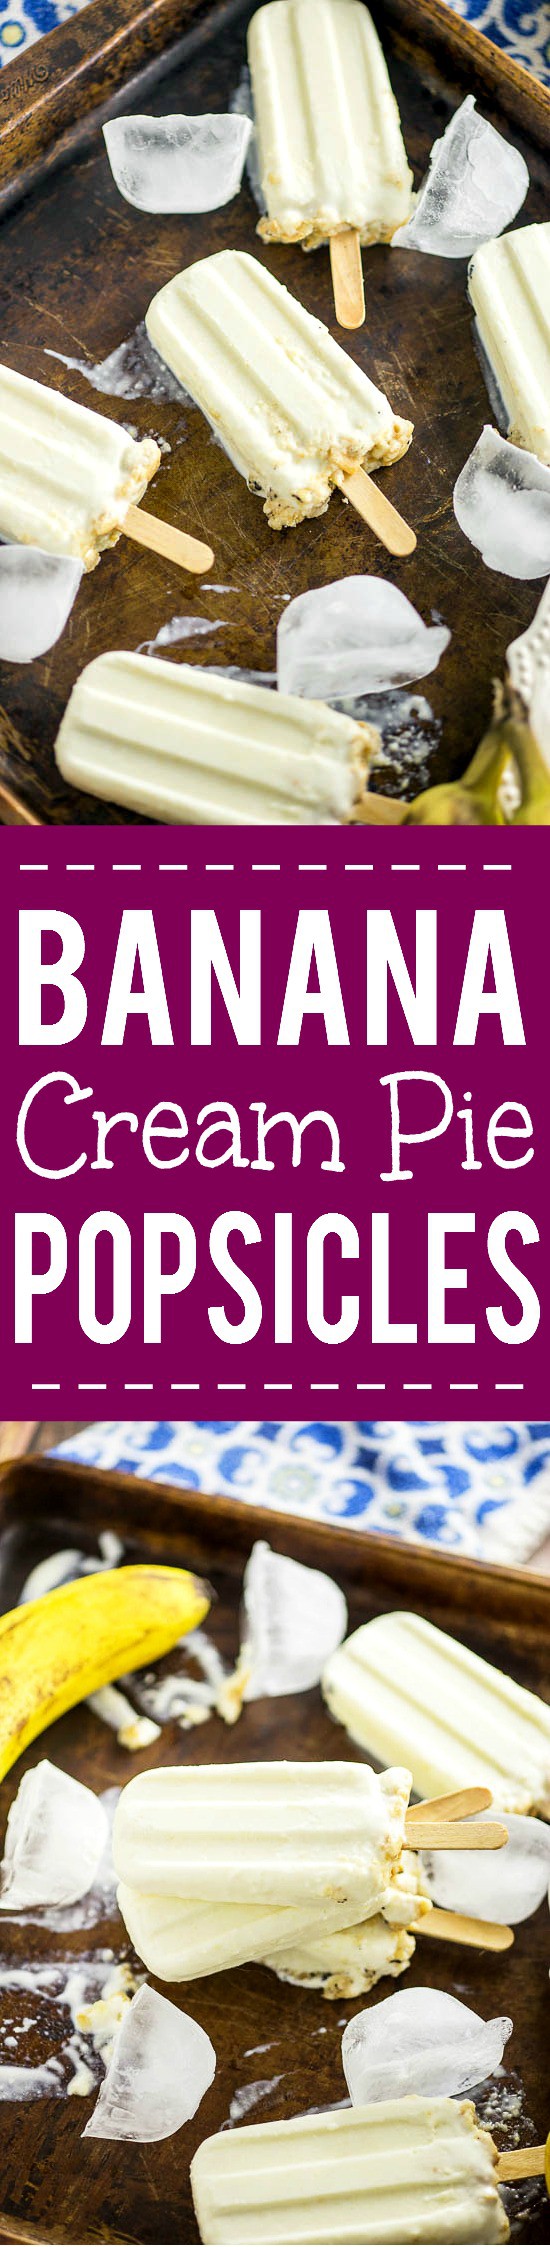 Banana Cream Pie Popsicles Recipe - Taking Banana Cream Pie to the next level, these Banana Cream Pie Popsicles will keep you cool and satisfied on a hot summer day. Just 4 ingredients to make this quick and easy popsicle recipe!